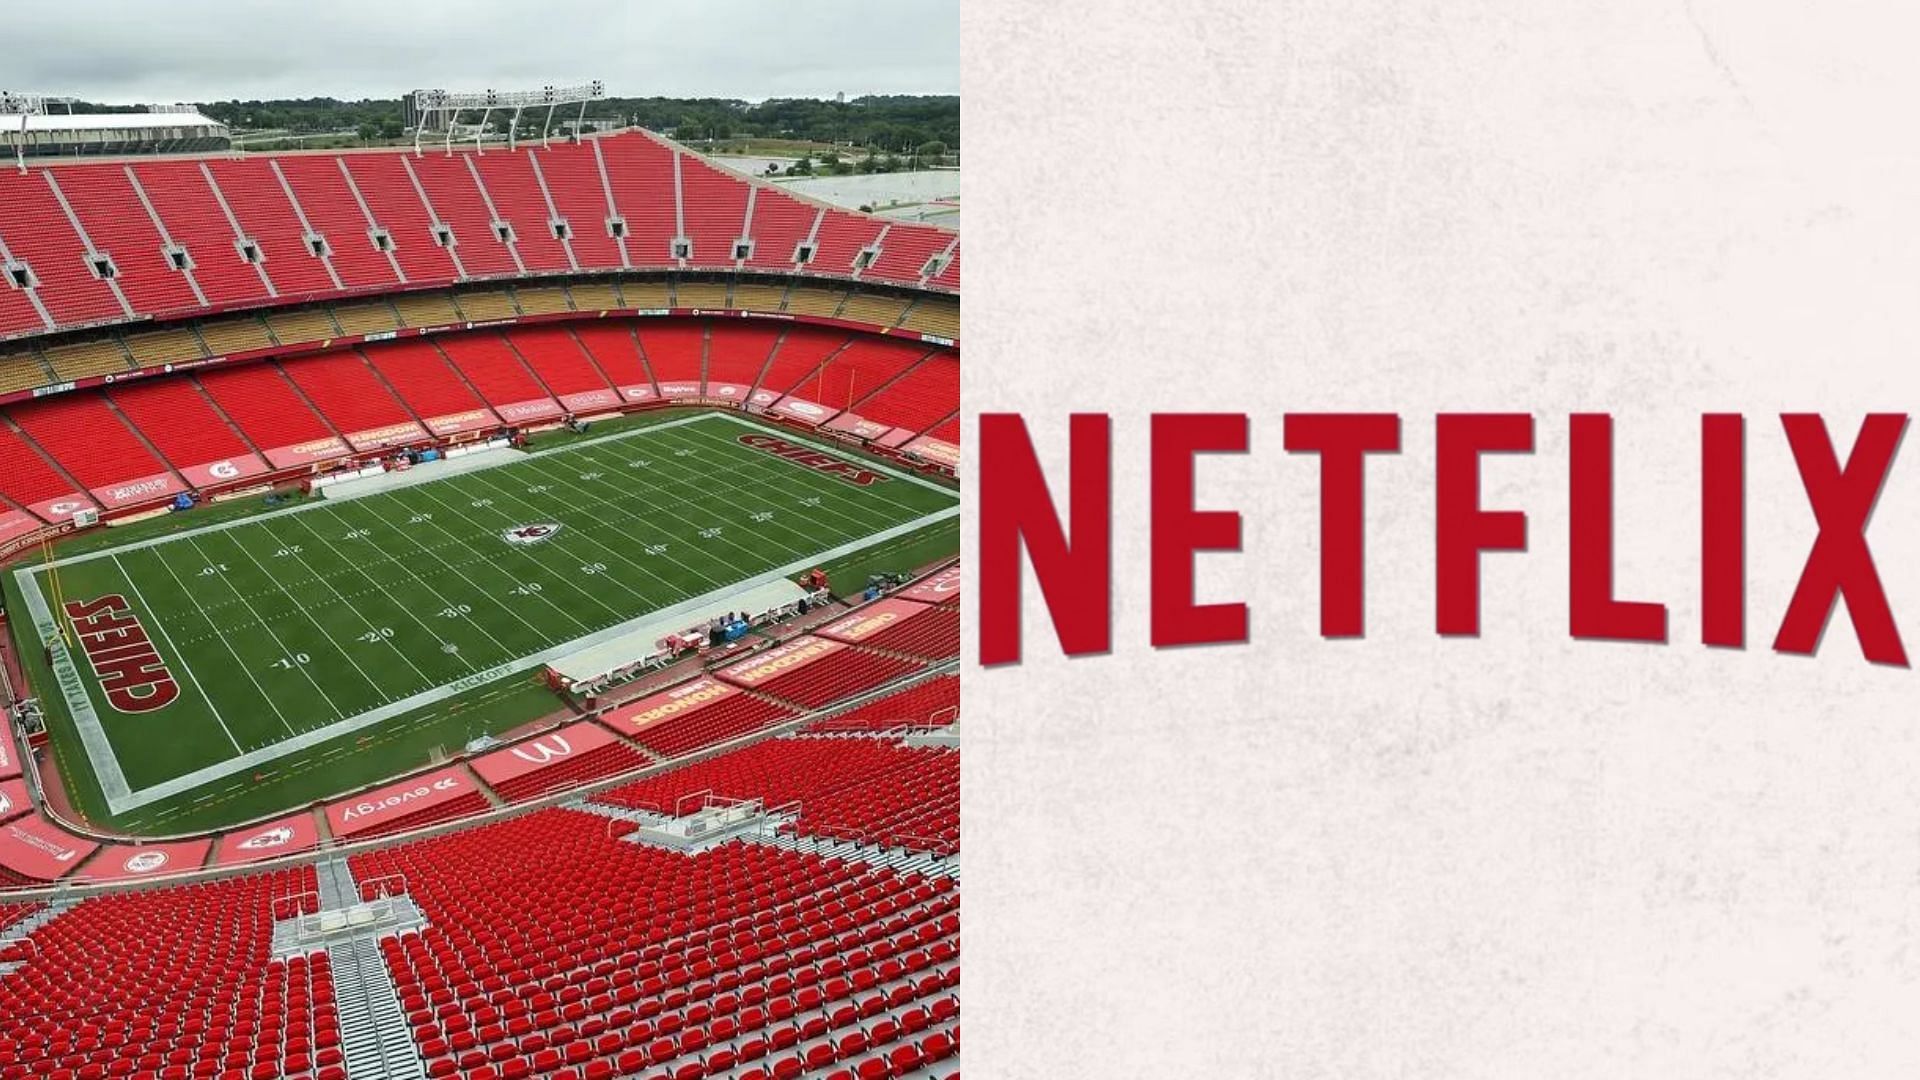 Could NFL games be heading to Netflix?